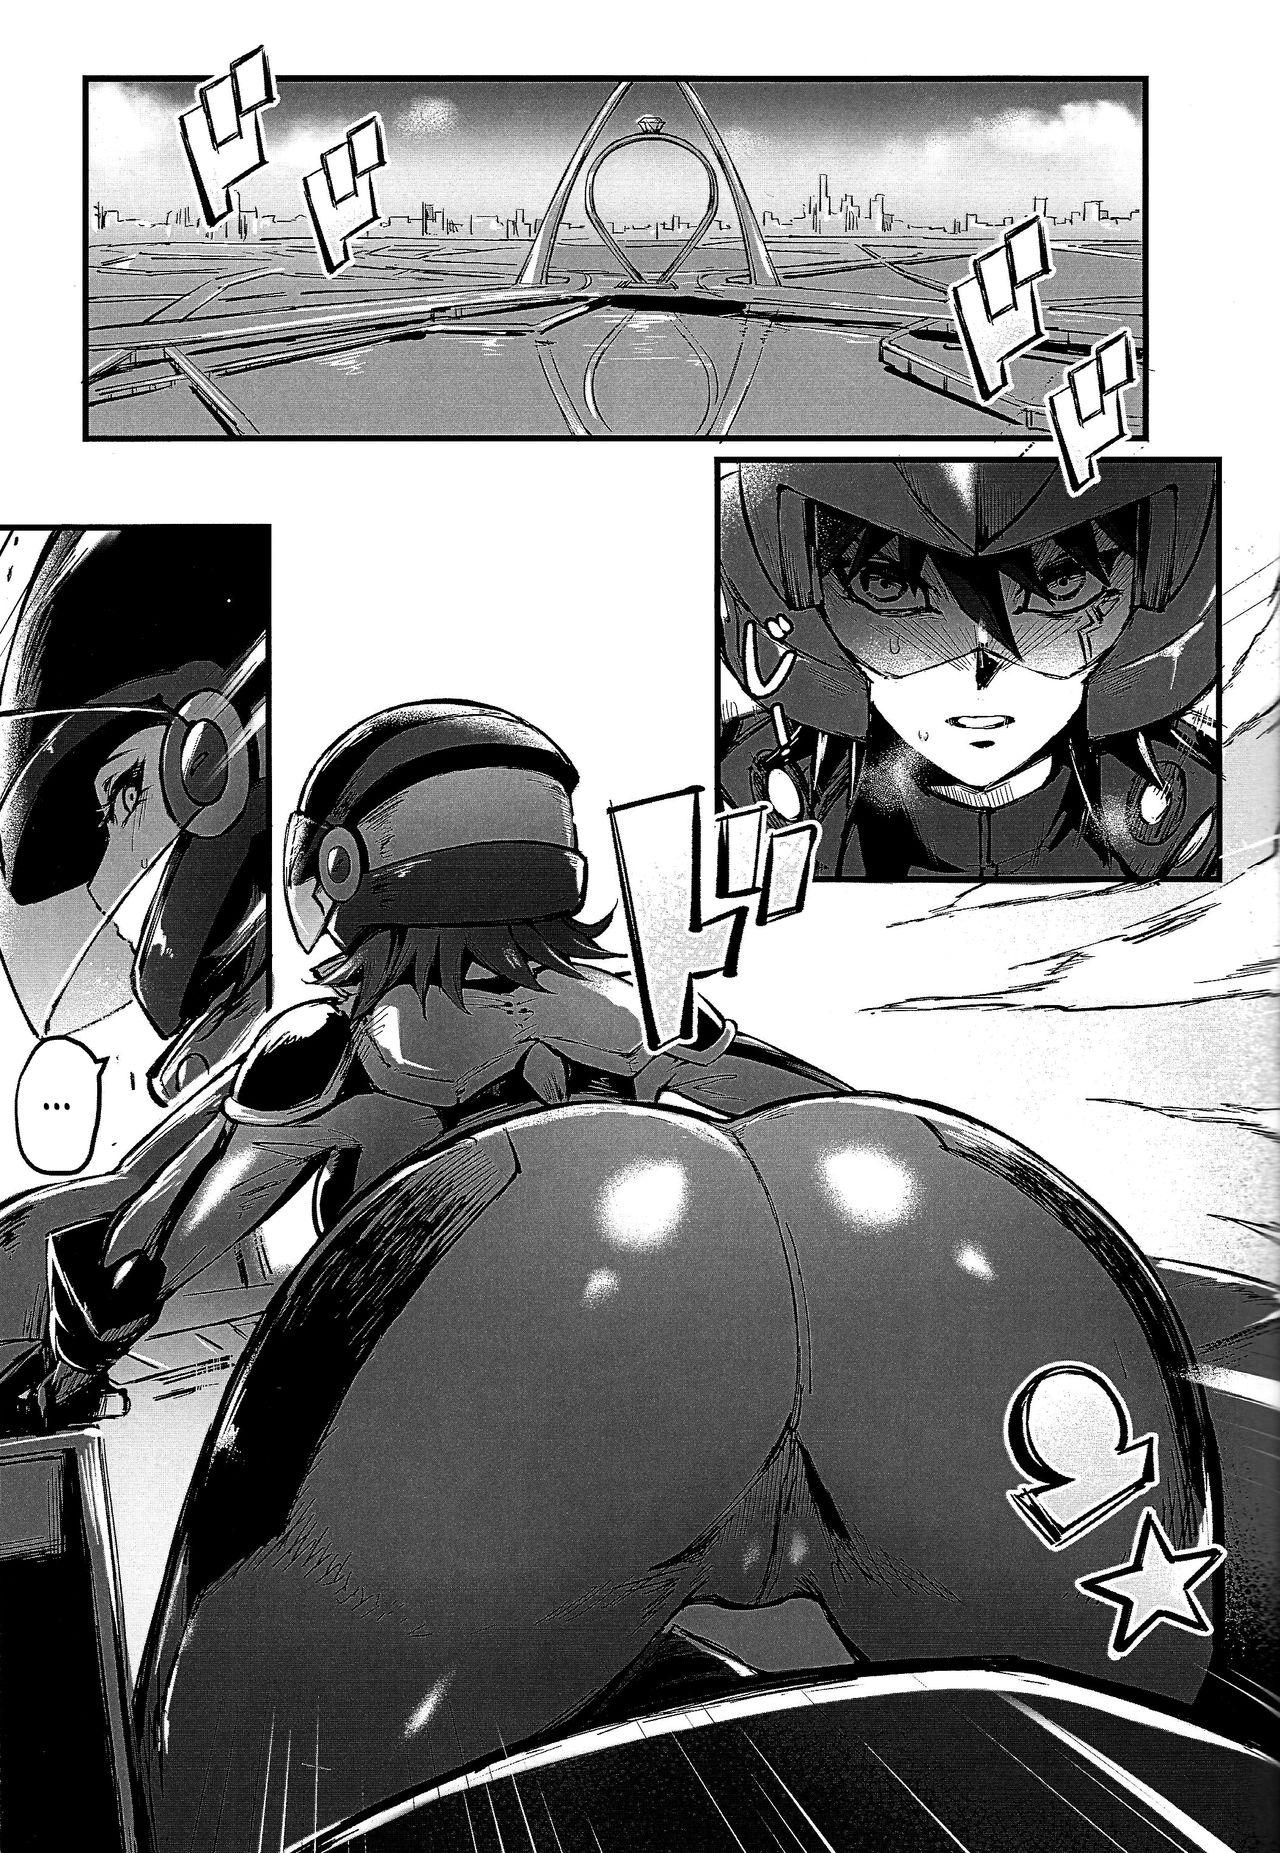 Chupa MASK of D. - Yu-gi-oh 5ds Hot Cunt - Page 2